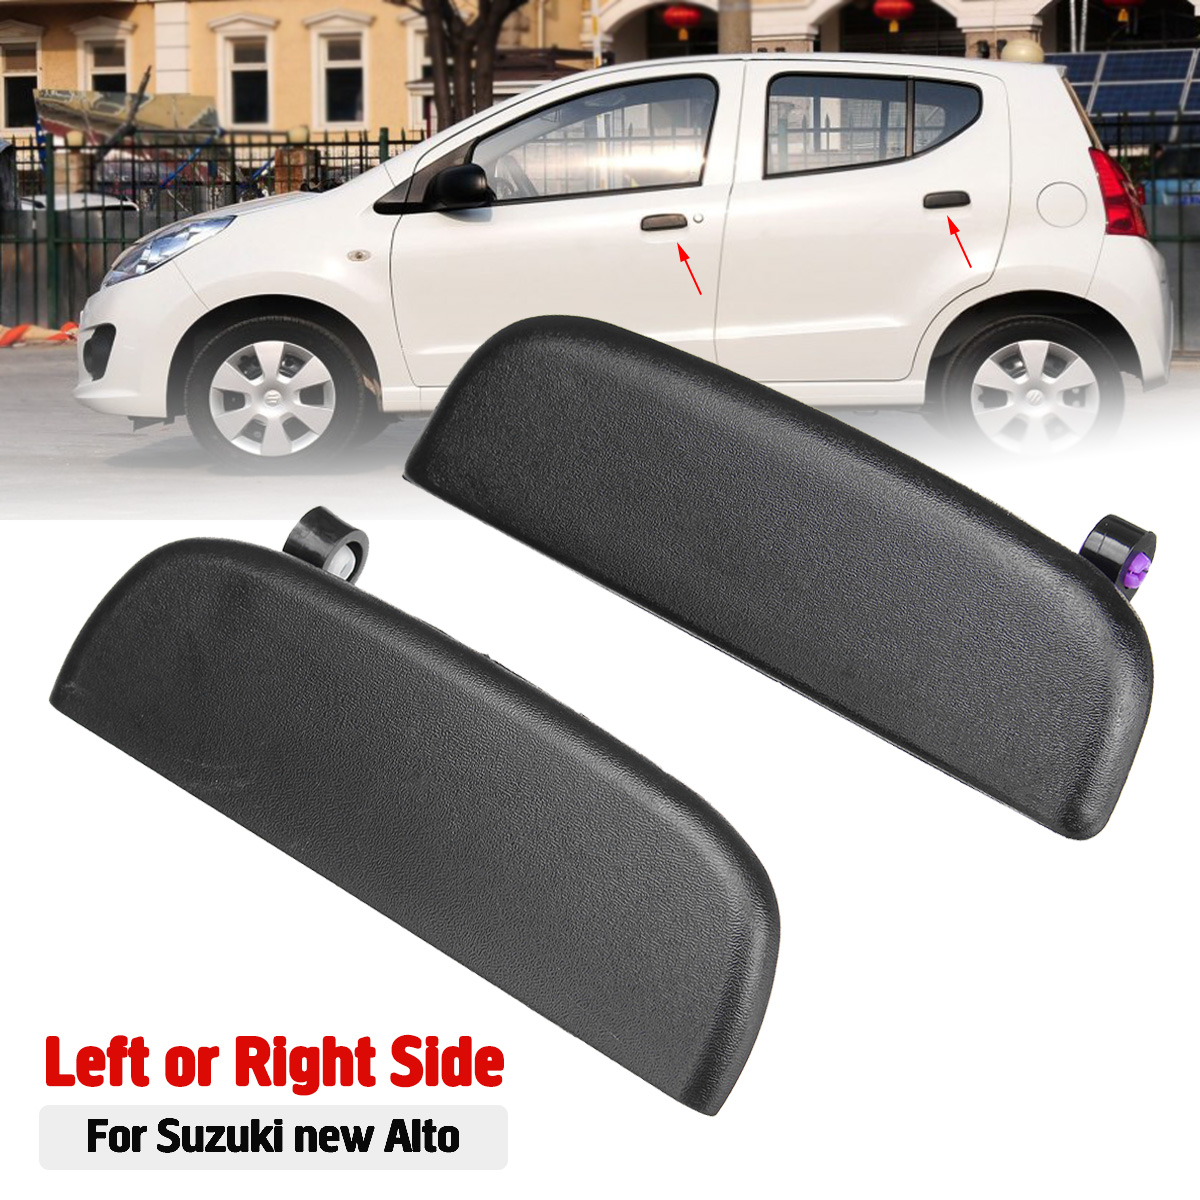 Left Viviance Left or Right Black Car Front and Rear Outer Door Handle Knob for Suzuki New Alto